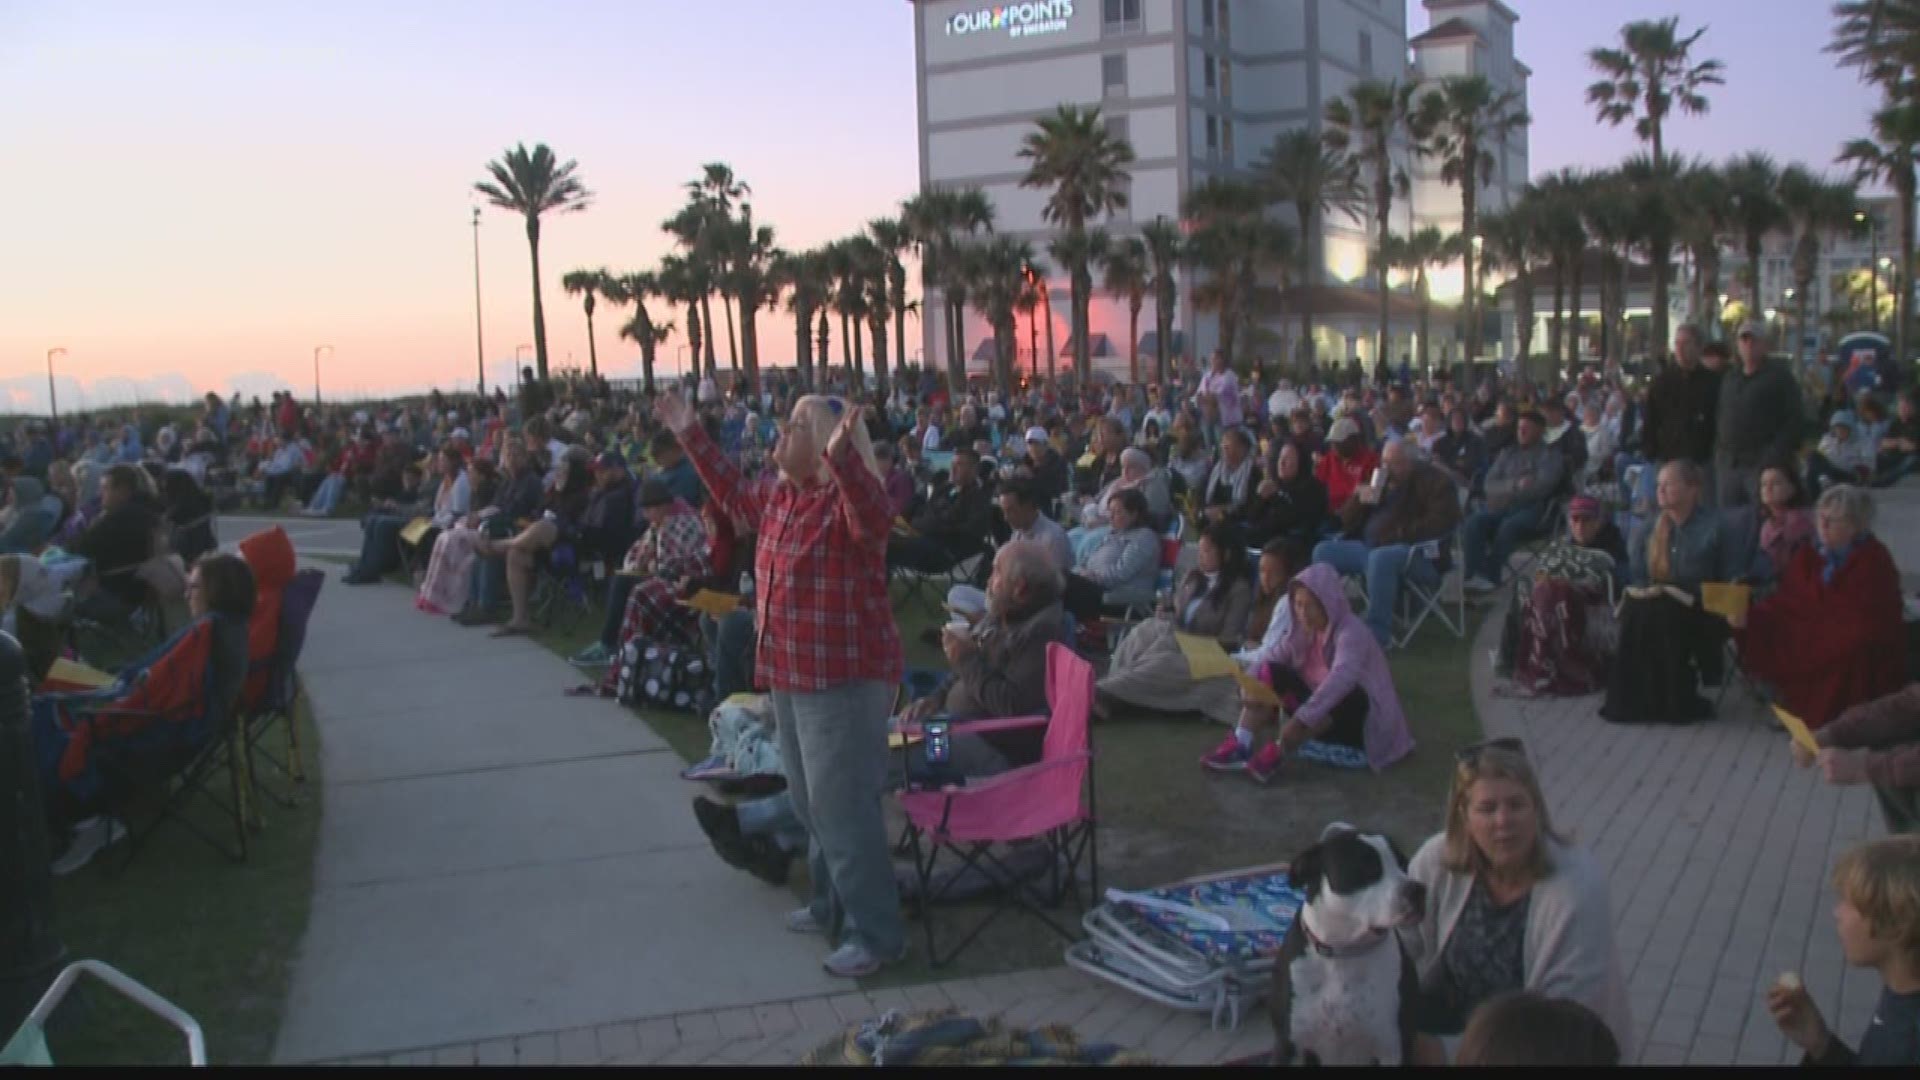 Easter Sunrise Service at Jax Beach continues annual tradition